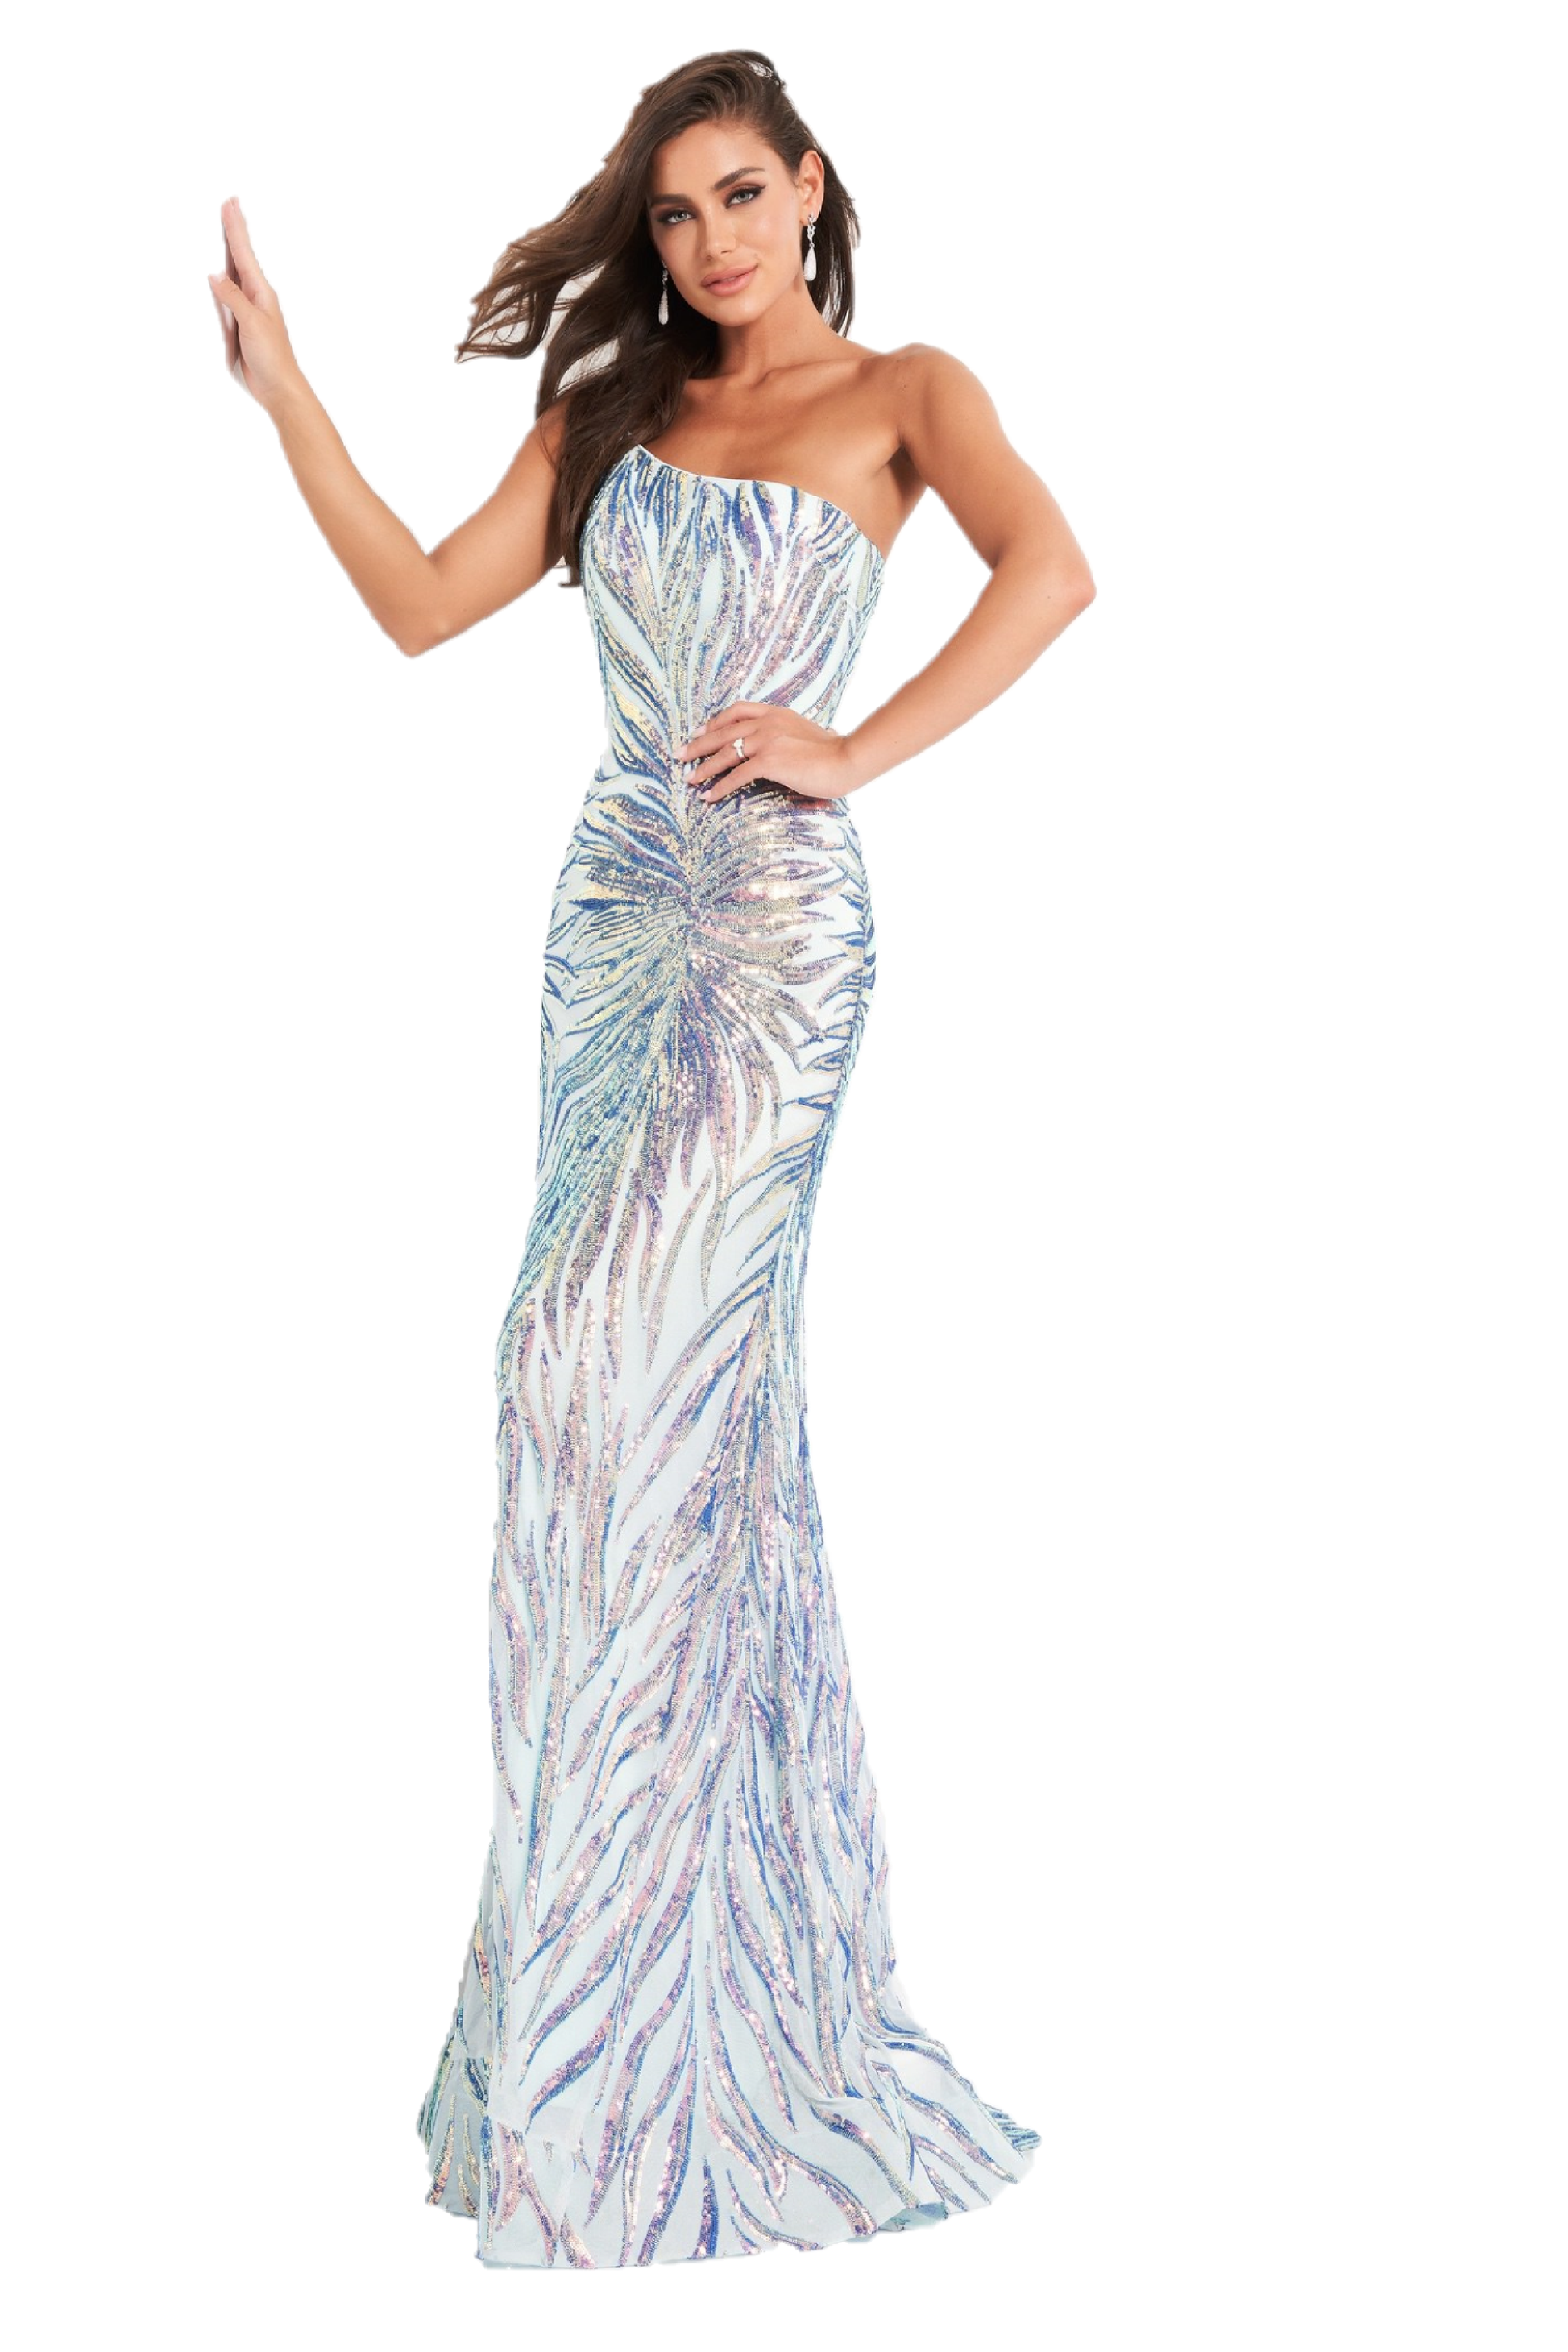 Jovani 05664 is a long fitted formal evening gown. This one shoulder Prom Dress has a Fit & Flare silhouette. Featuring Embellished Sequin Asymmetrical  Starburst patterns that accentuate any figure! Lush sweeping train is perfect for Pageant Presence on stage!   Available Sizes: 00,0,2,4,6,8,10,12,14,16,18,20,22,24  Available Colors: Mint/Multi